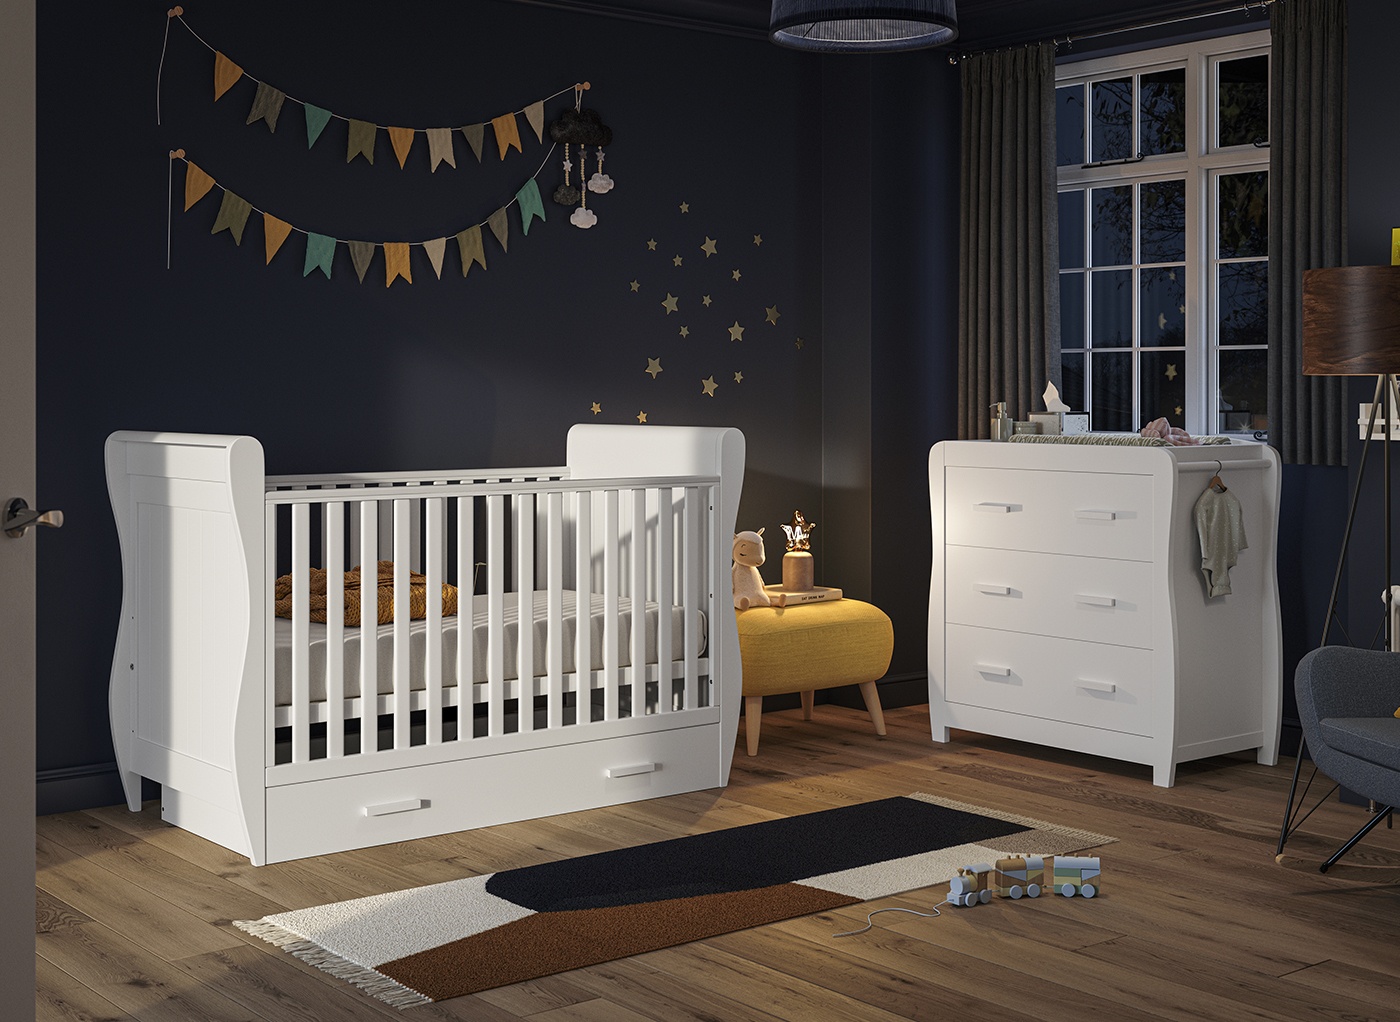 Nursery ideas for your baby | Style Inspiration & Accessories